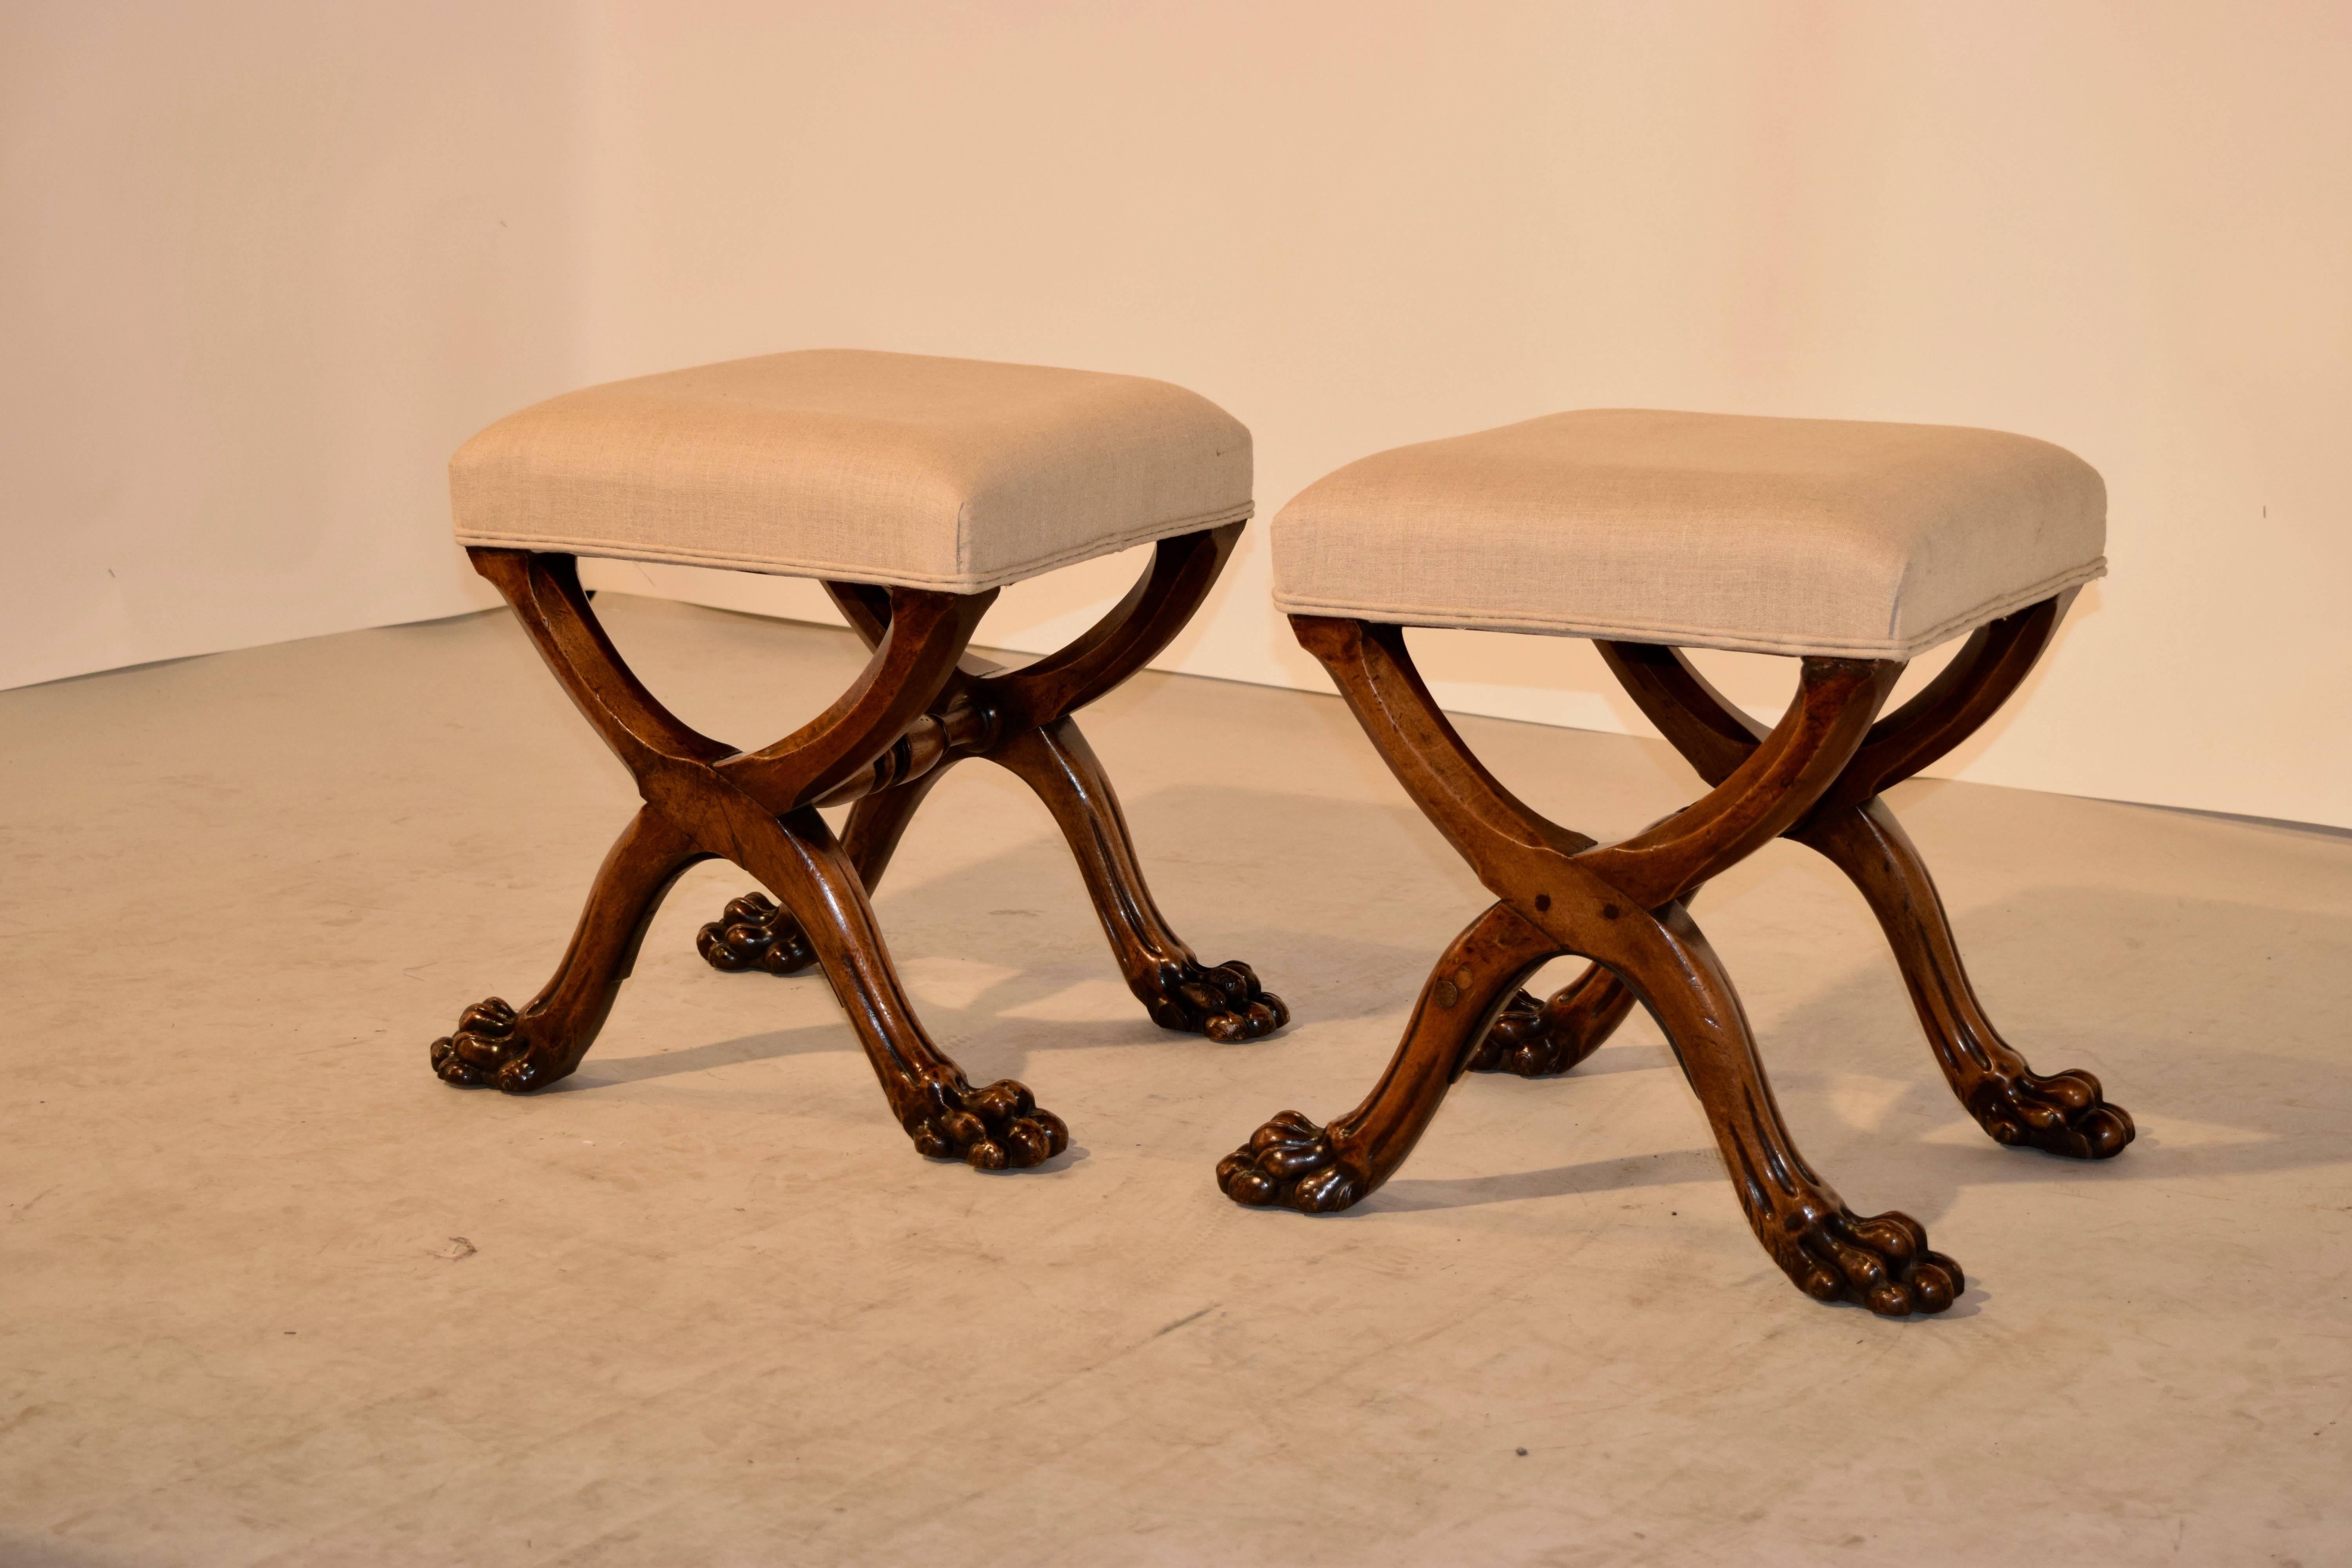 19th century pair of English stools with newly upholstered tops in linen. The bases are made from mahogany, as are the X-style legs, and joined by hand-turned stretchers ending in hand-carved paw feet. Newly upholstered in linen, old repairs and